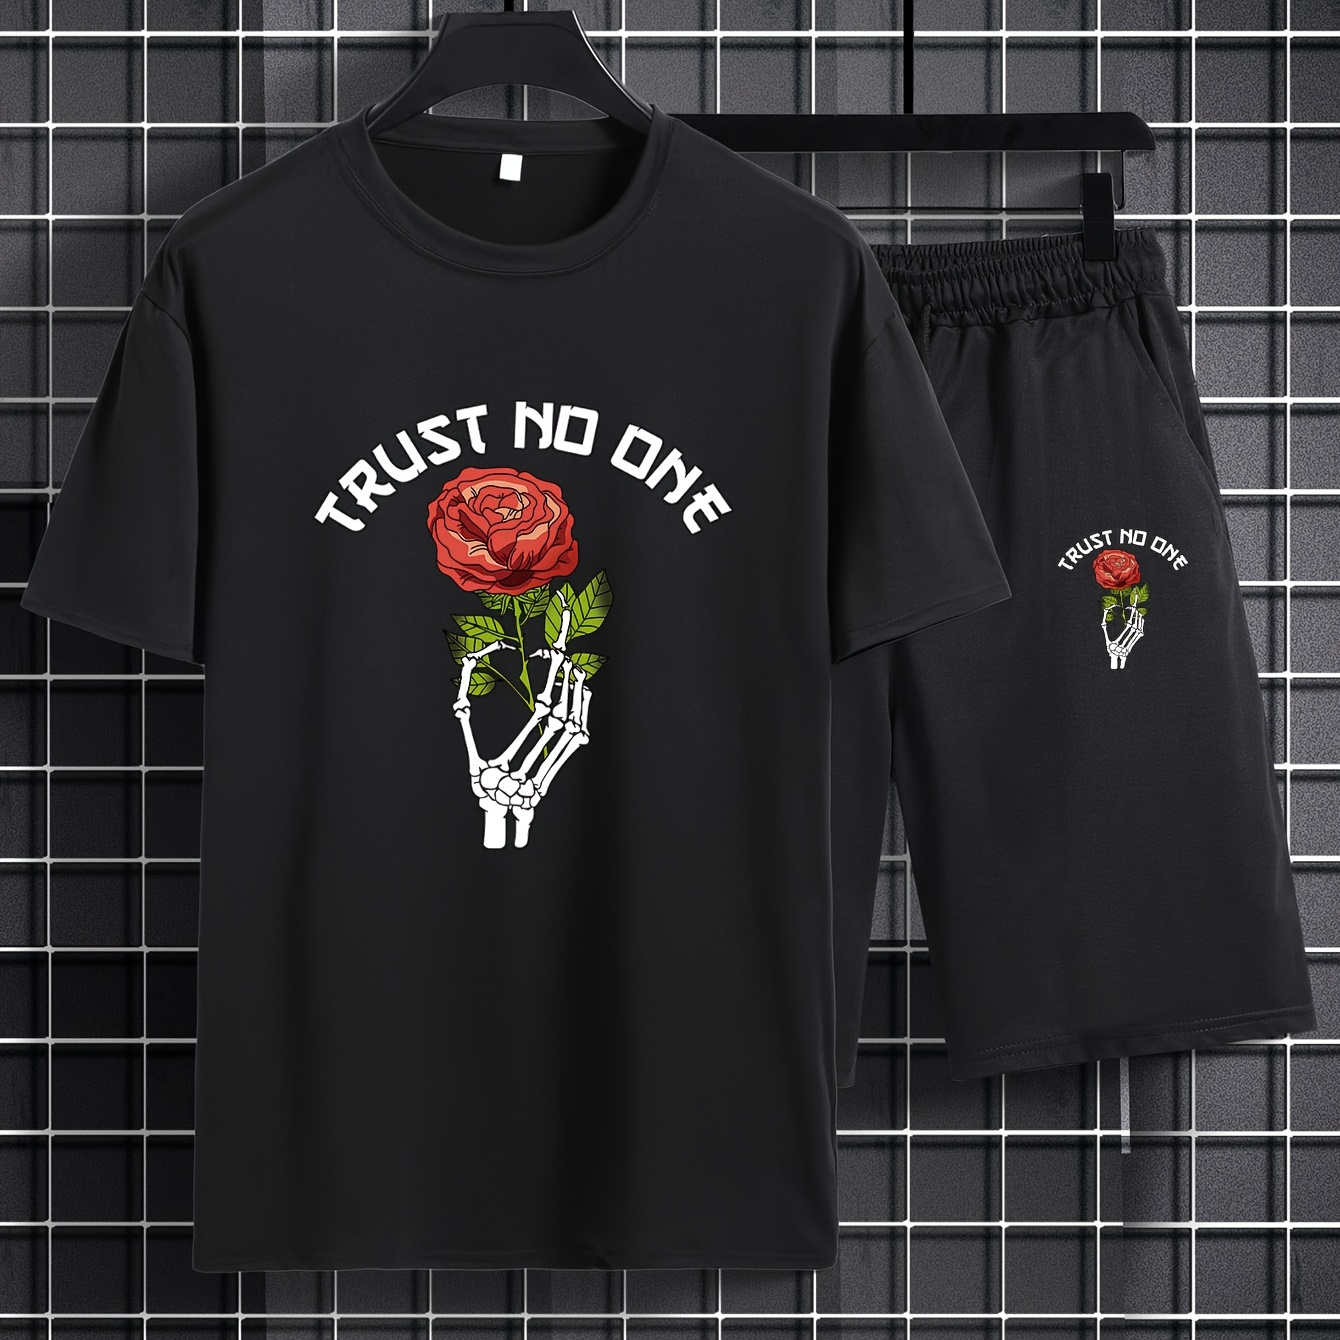 

Skeleton Hand Holding Rose Print, Mens 2 Piece Outfits, Comfy Short Sleeve T-shirt And Casual Drawstring Shorts Set For Summer, Men's Clothing